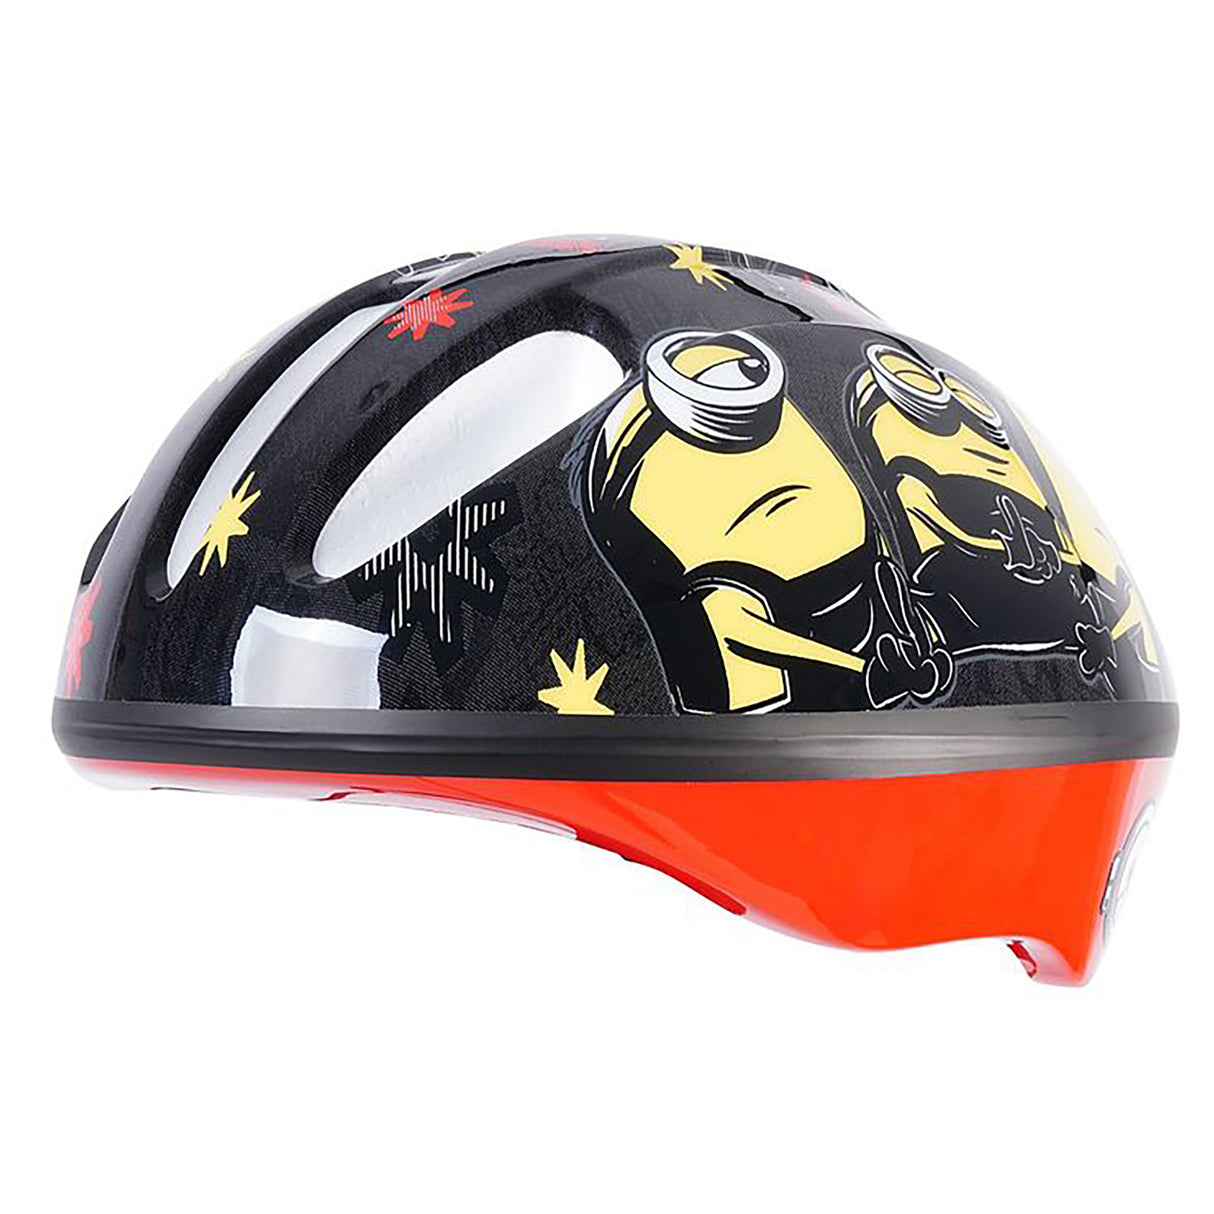 Hyper Extension Minions Child Bicycle Safety Helmet